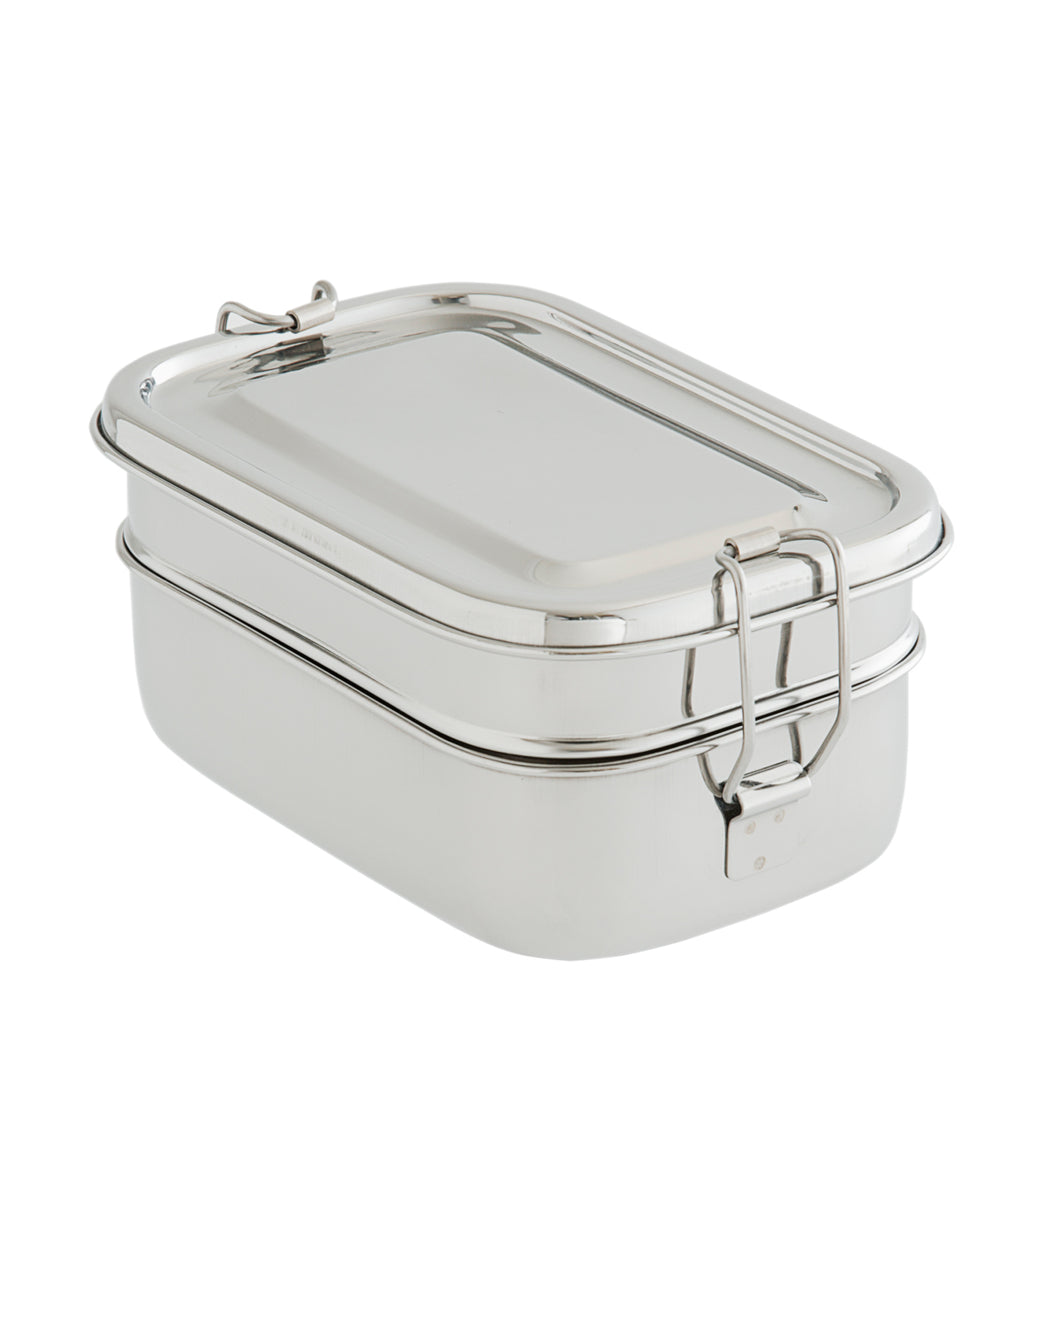 Stainless Steel Lunchboxes - Orethic.com